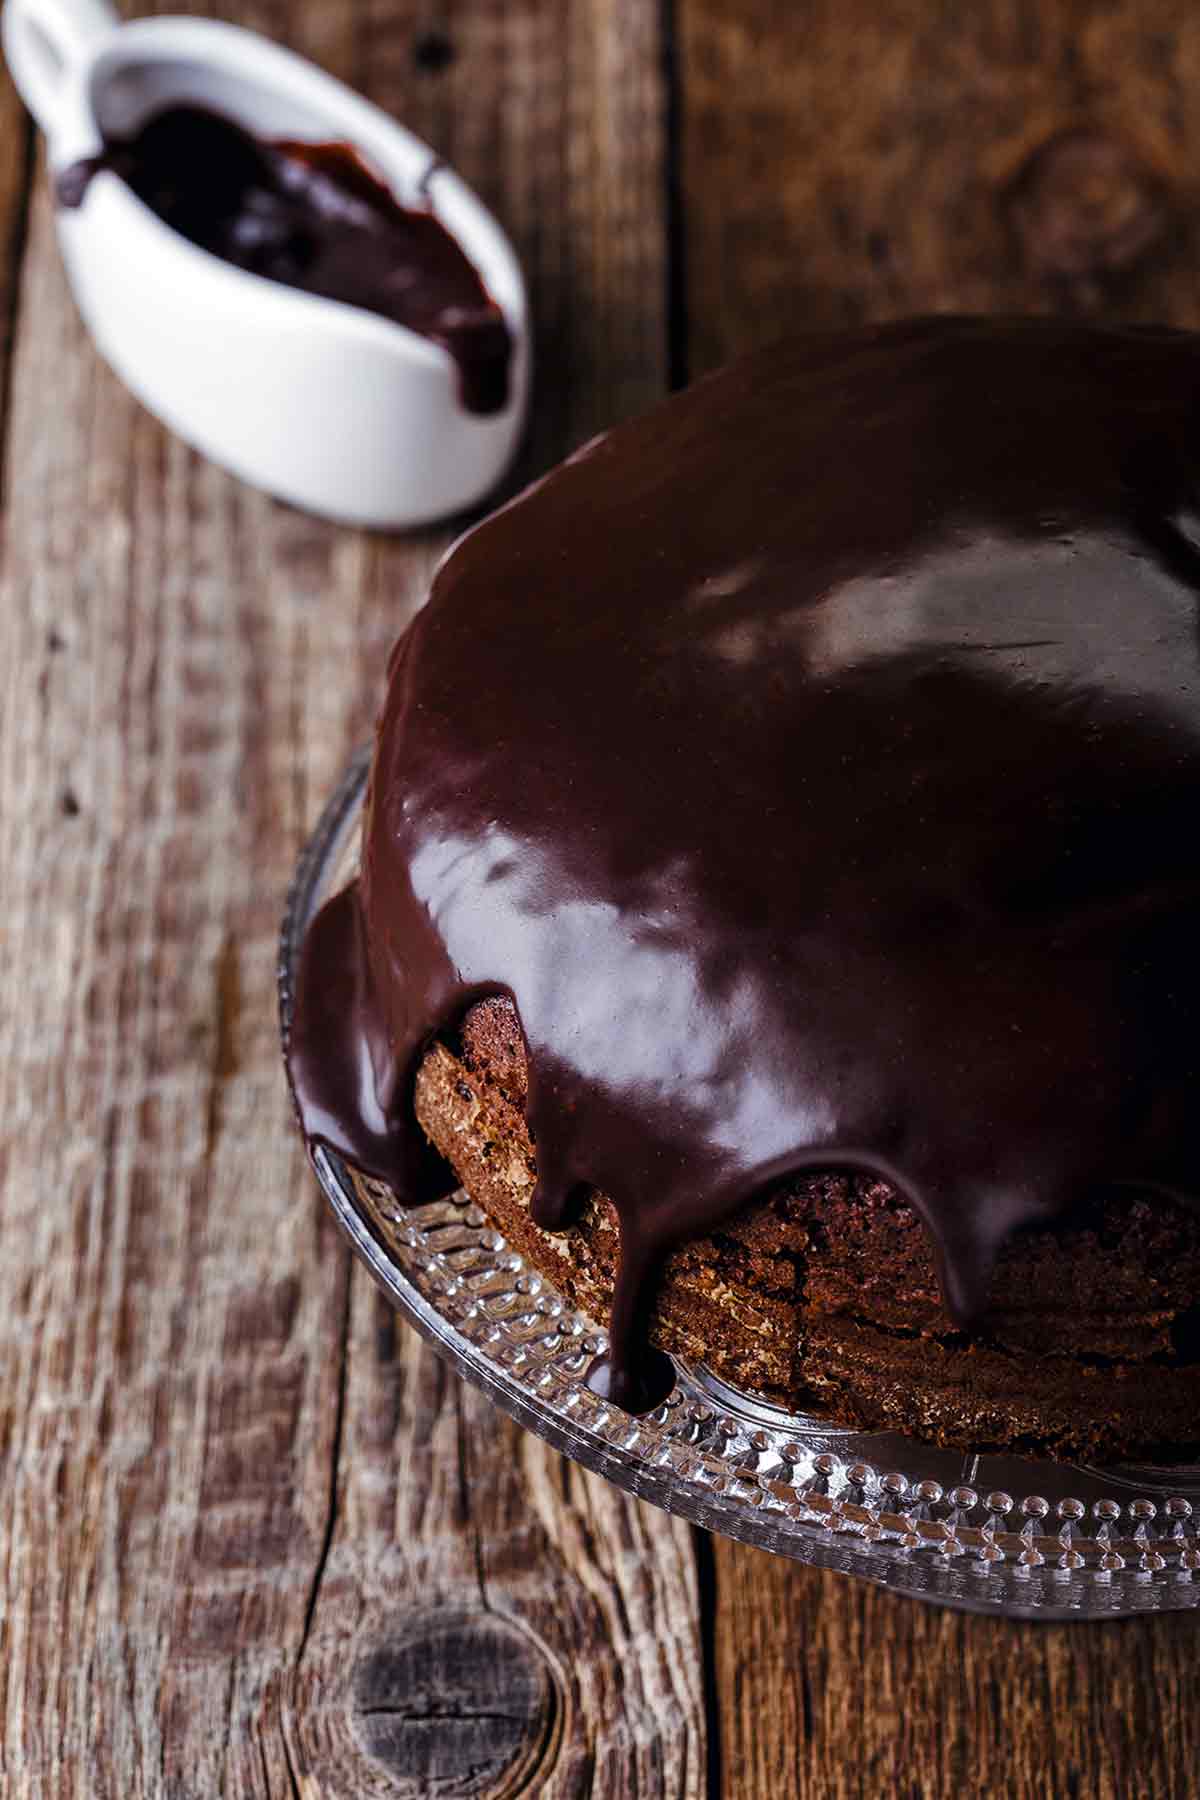 A chocolate mocha cake with chocolate Irish whiskey glaze being poured on top